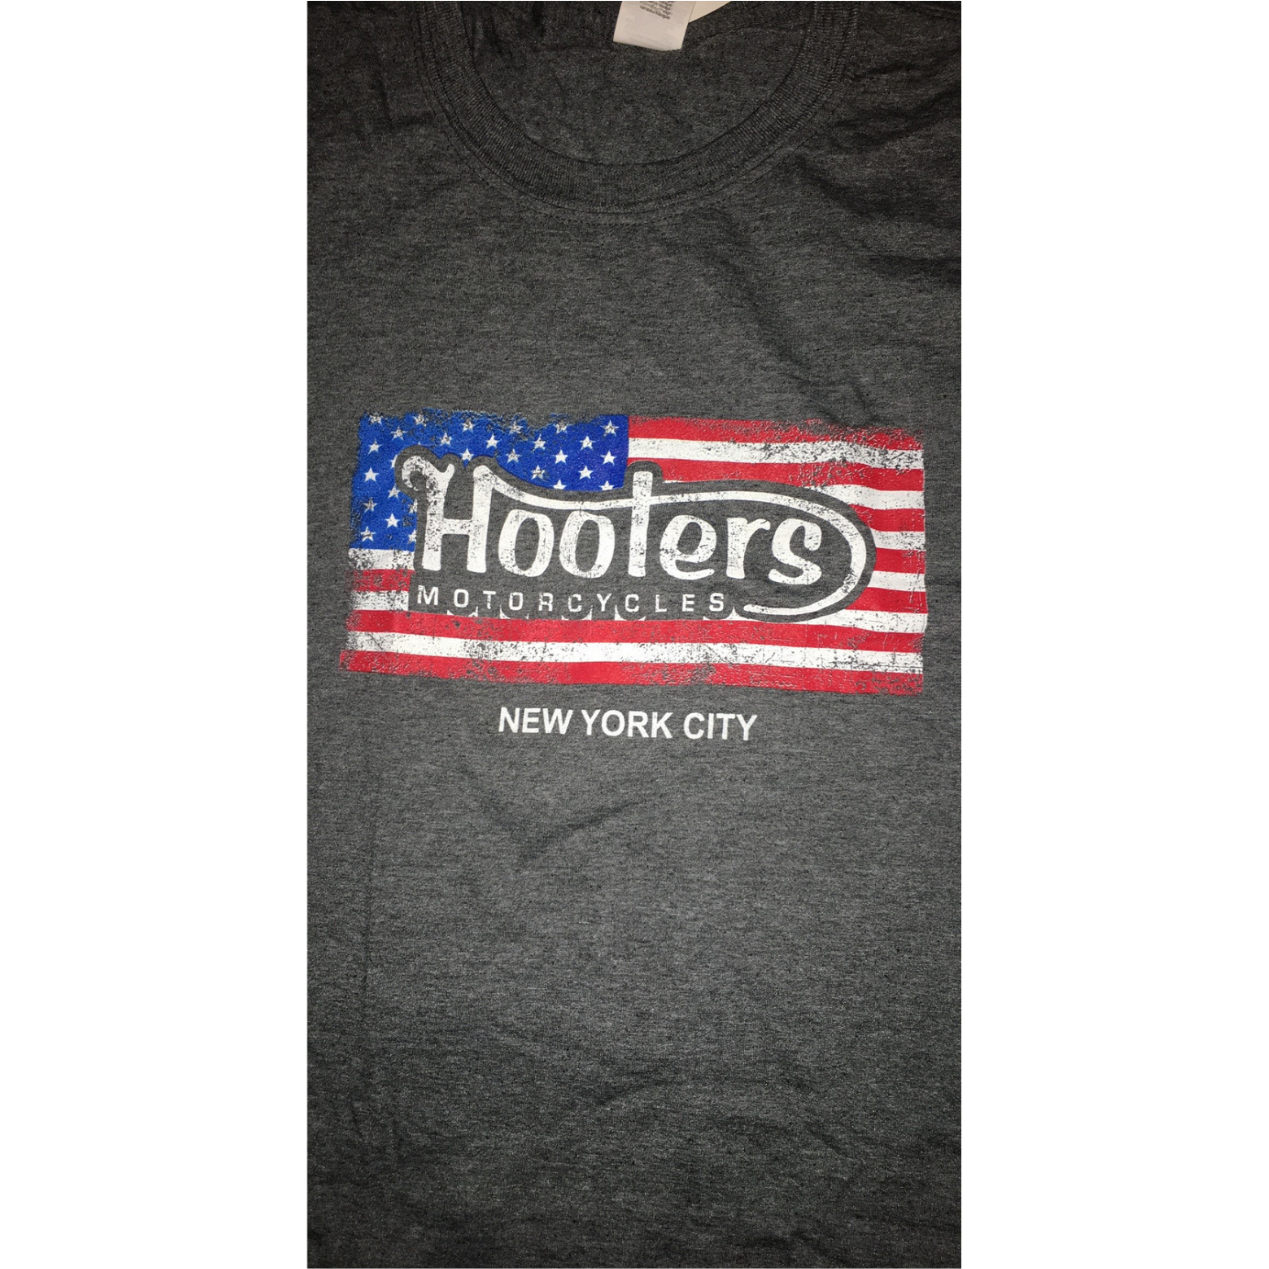 Hooters motorcycles t shirt NYC